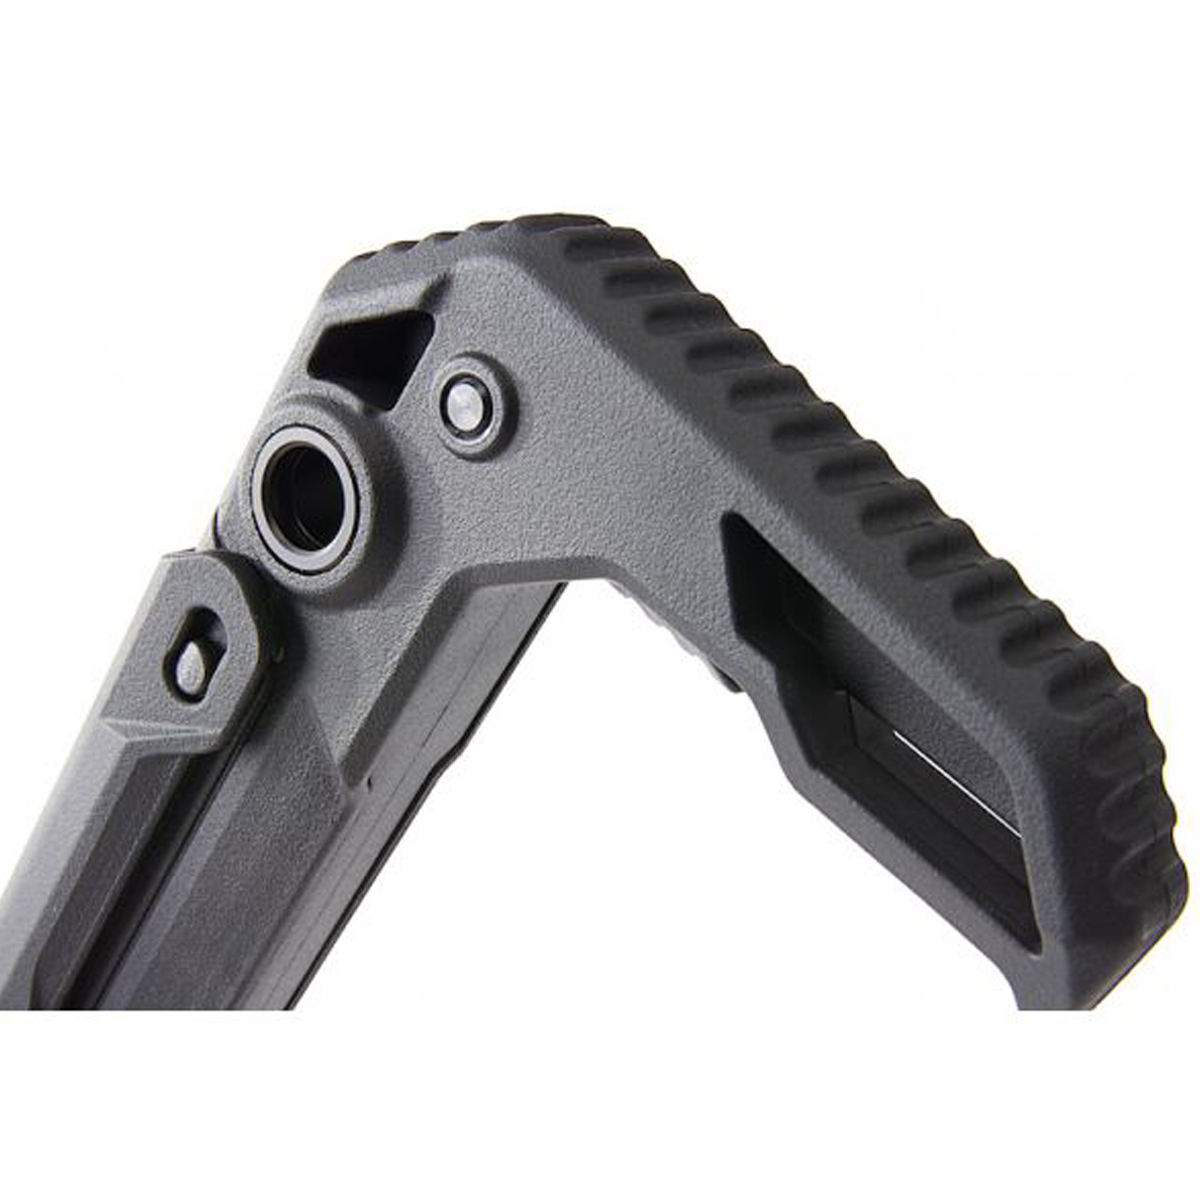 Action Army AAP-01 Folding Stock Kit (Color: Black) - Click Image to Close